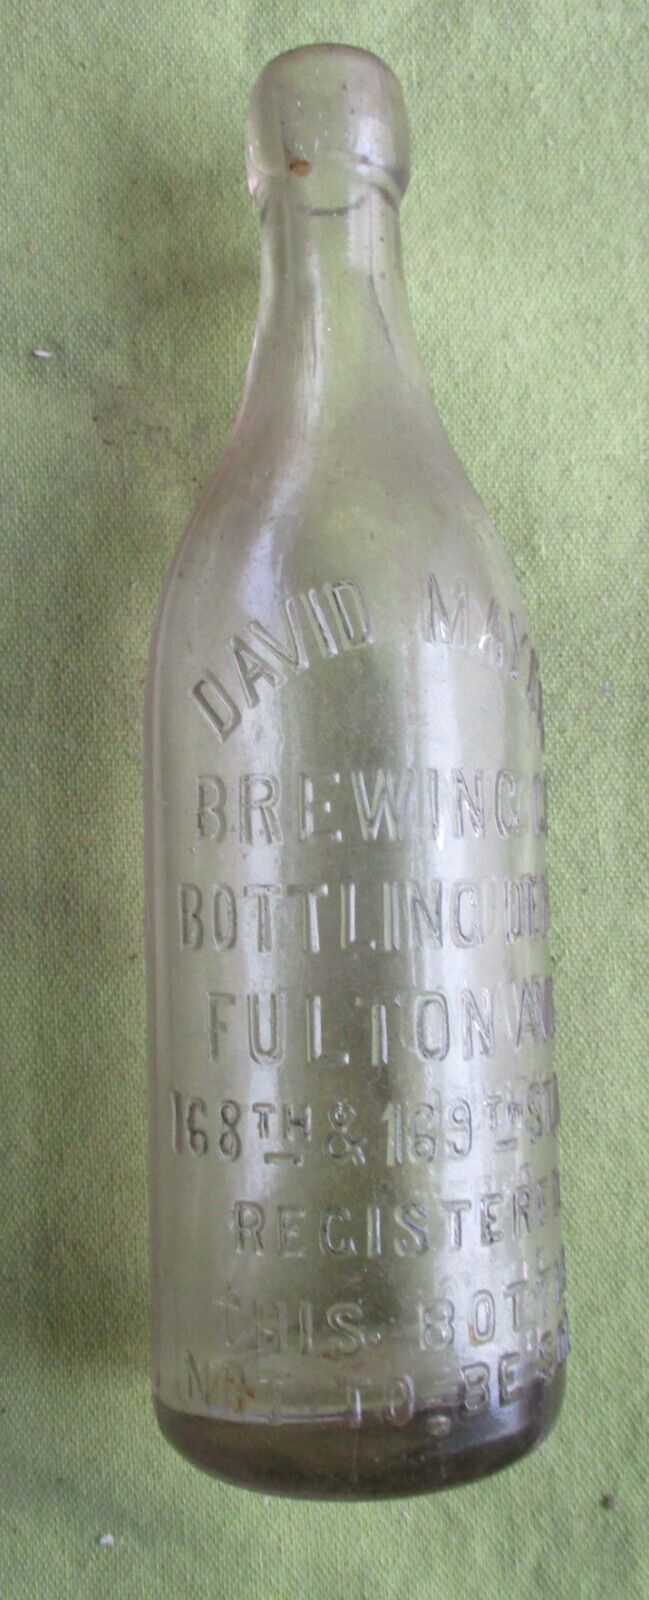 DAVID MAYER BREWING CO. BEER BOTTLE FULTON AVE NYC